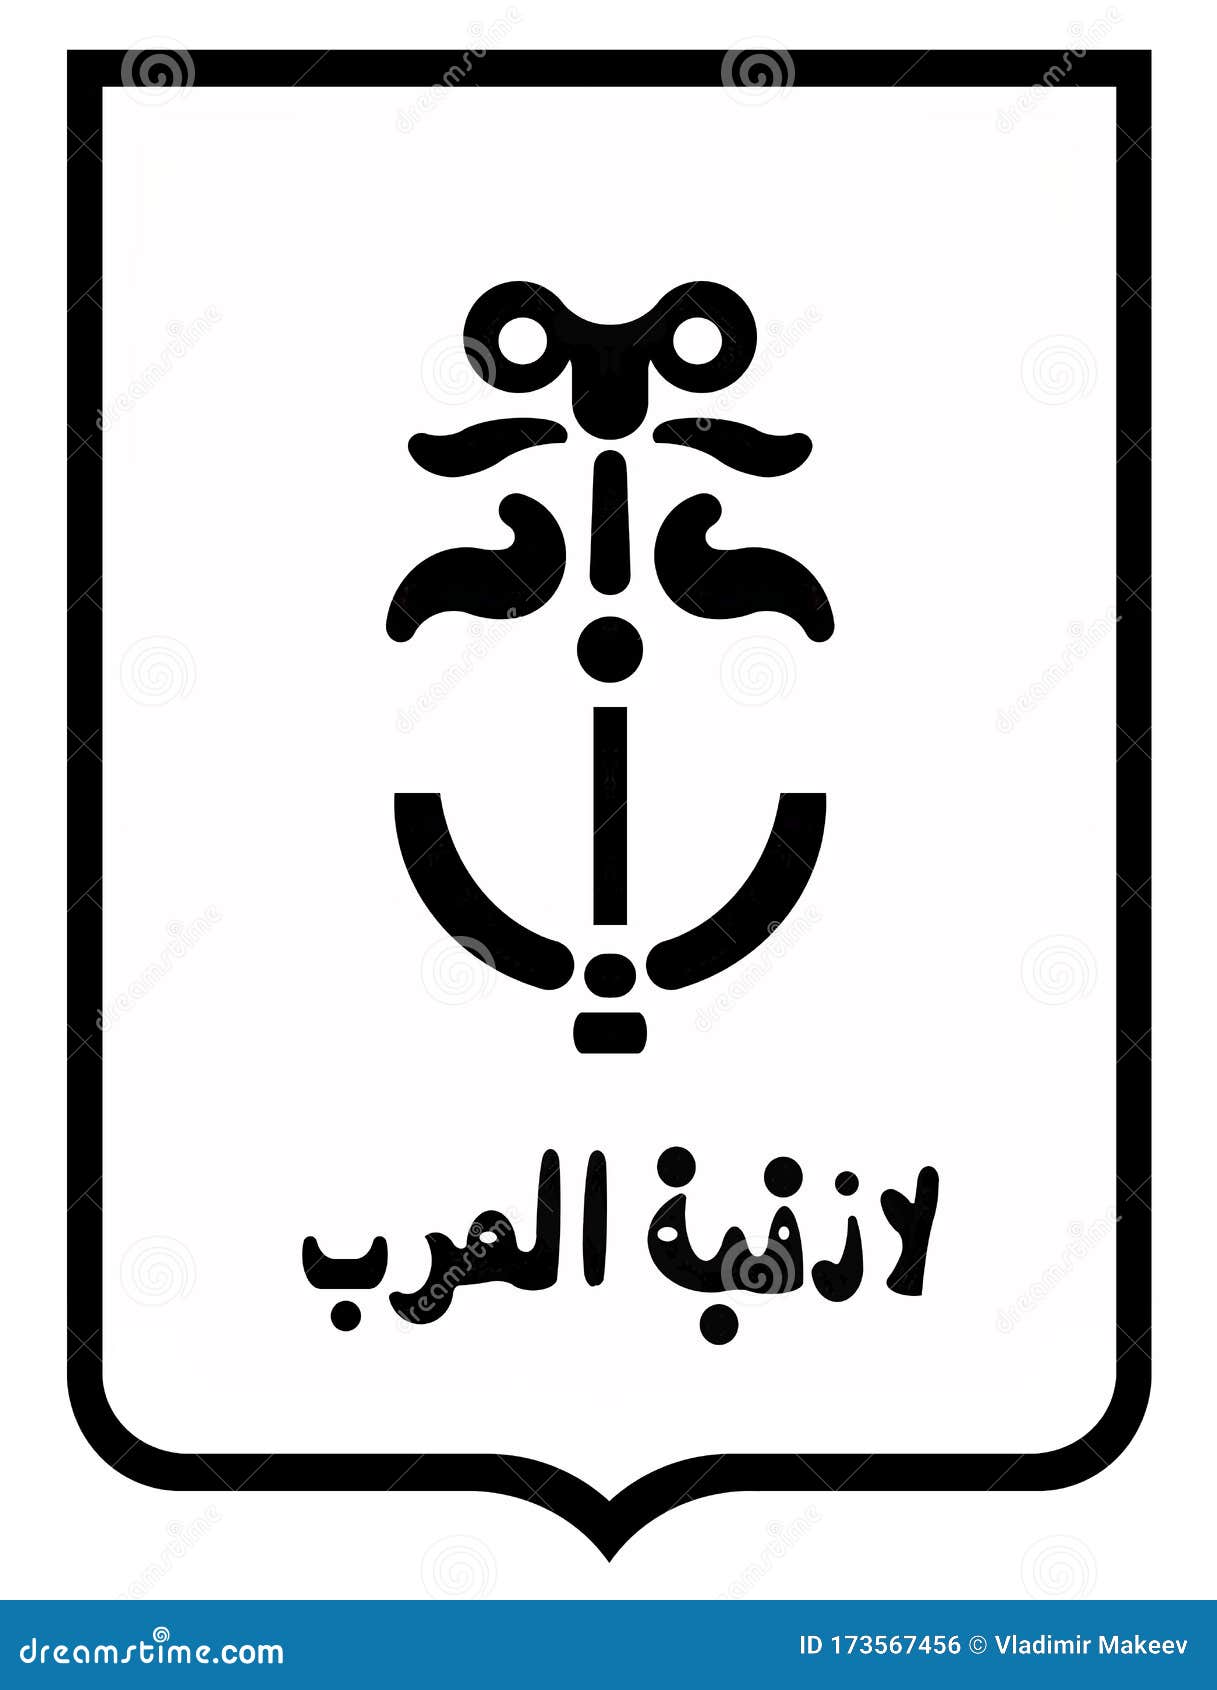 coat of arms of the city of latakia. syria